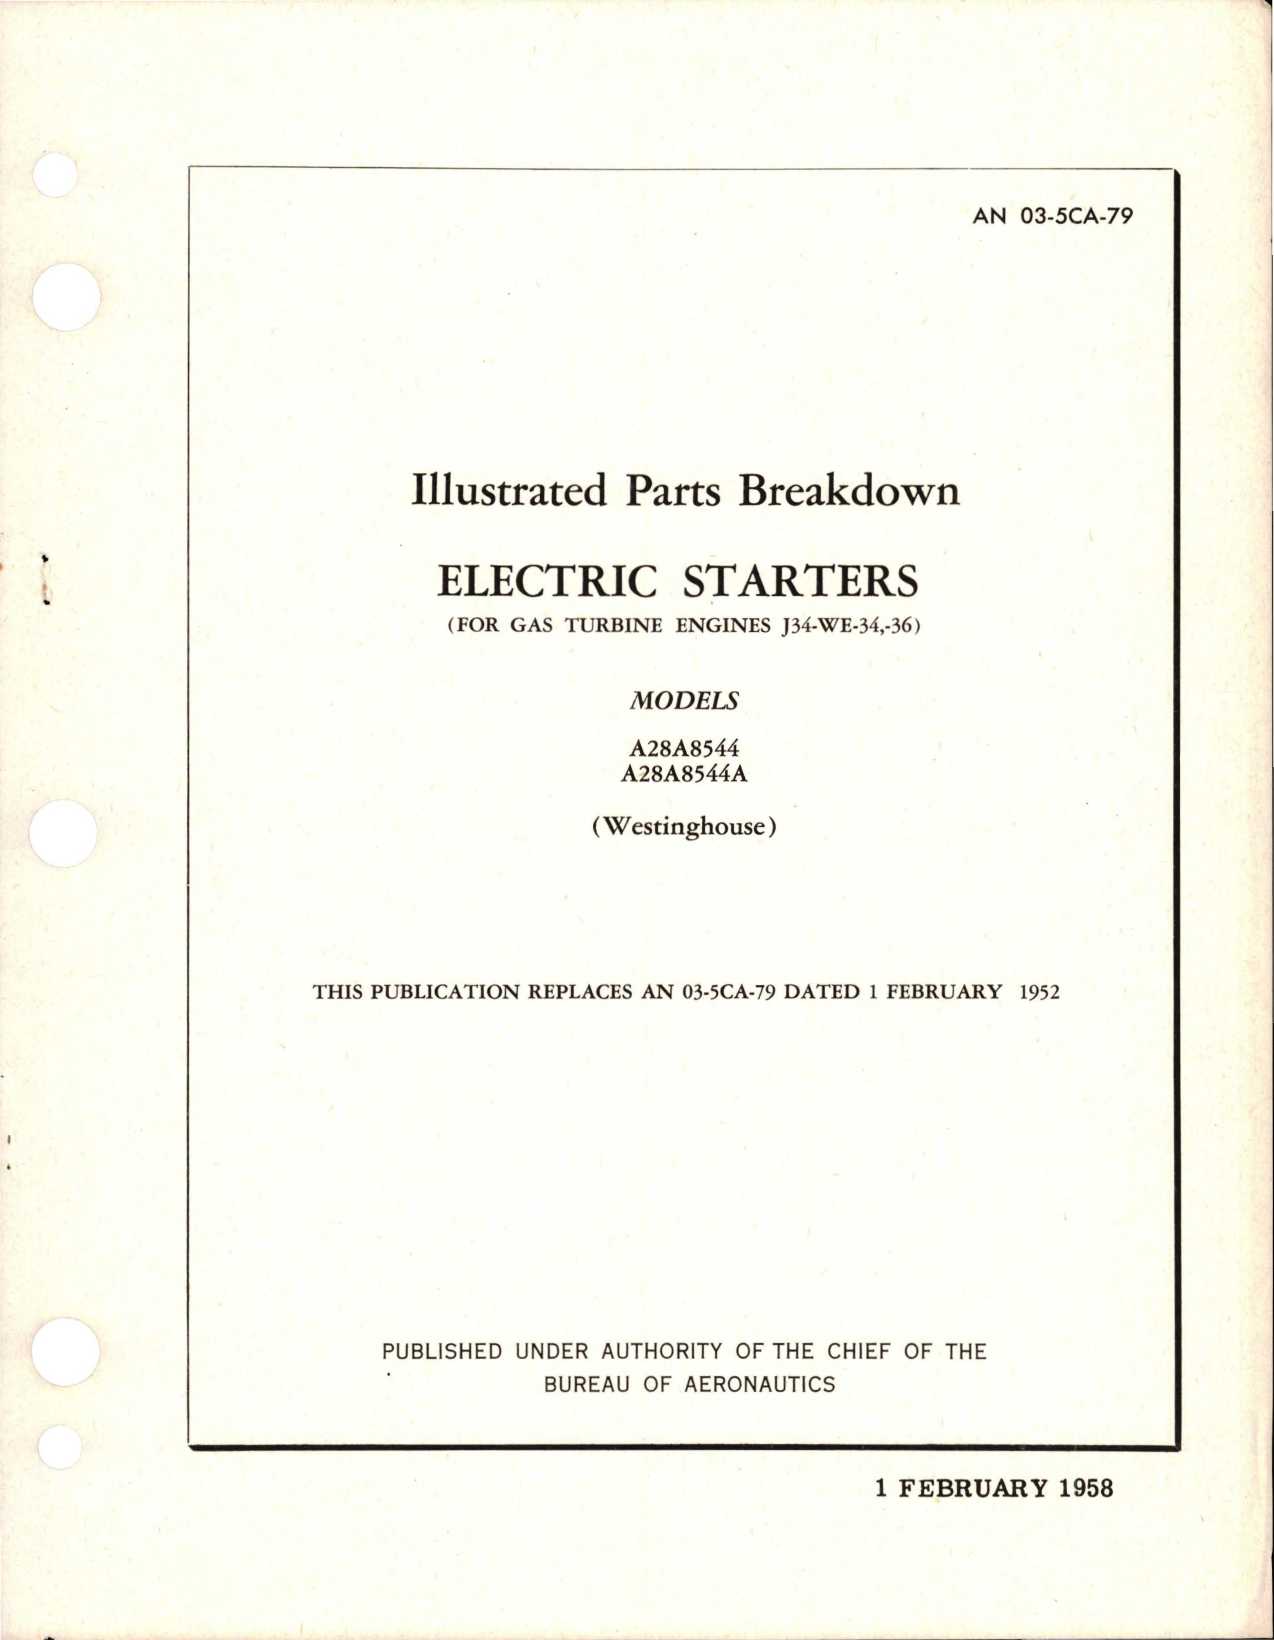 Sample page 1 from AirCorps Library document: Illustrated Parts Breakdown for Electric Starters (for Gas Turbine Engines) Models A28A8544, and A28A8544A